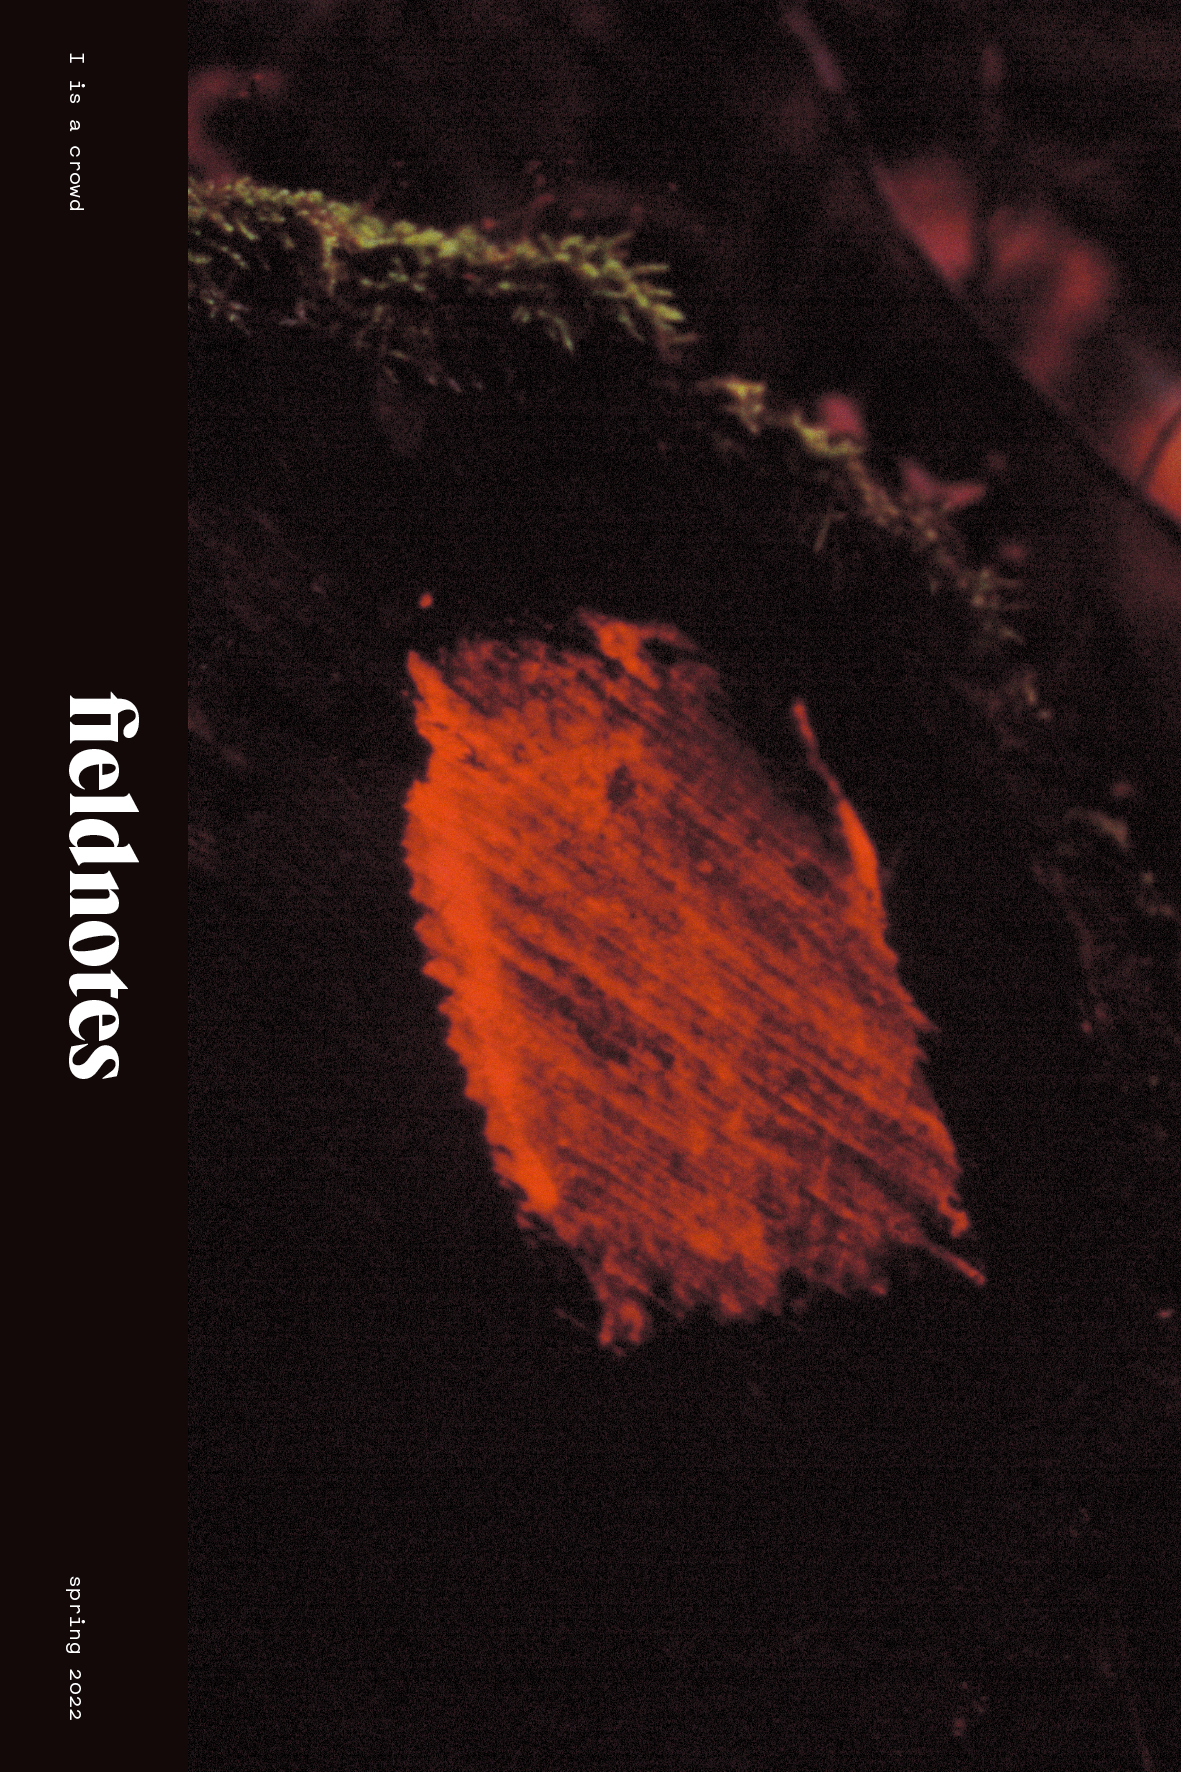 FN003 Front Cover - a bright red smear of paint is set against a black background, moss and branches are visible in the background